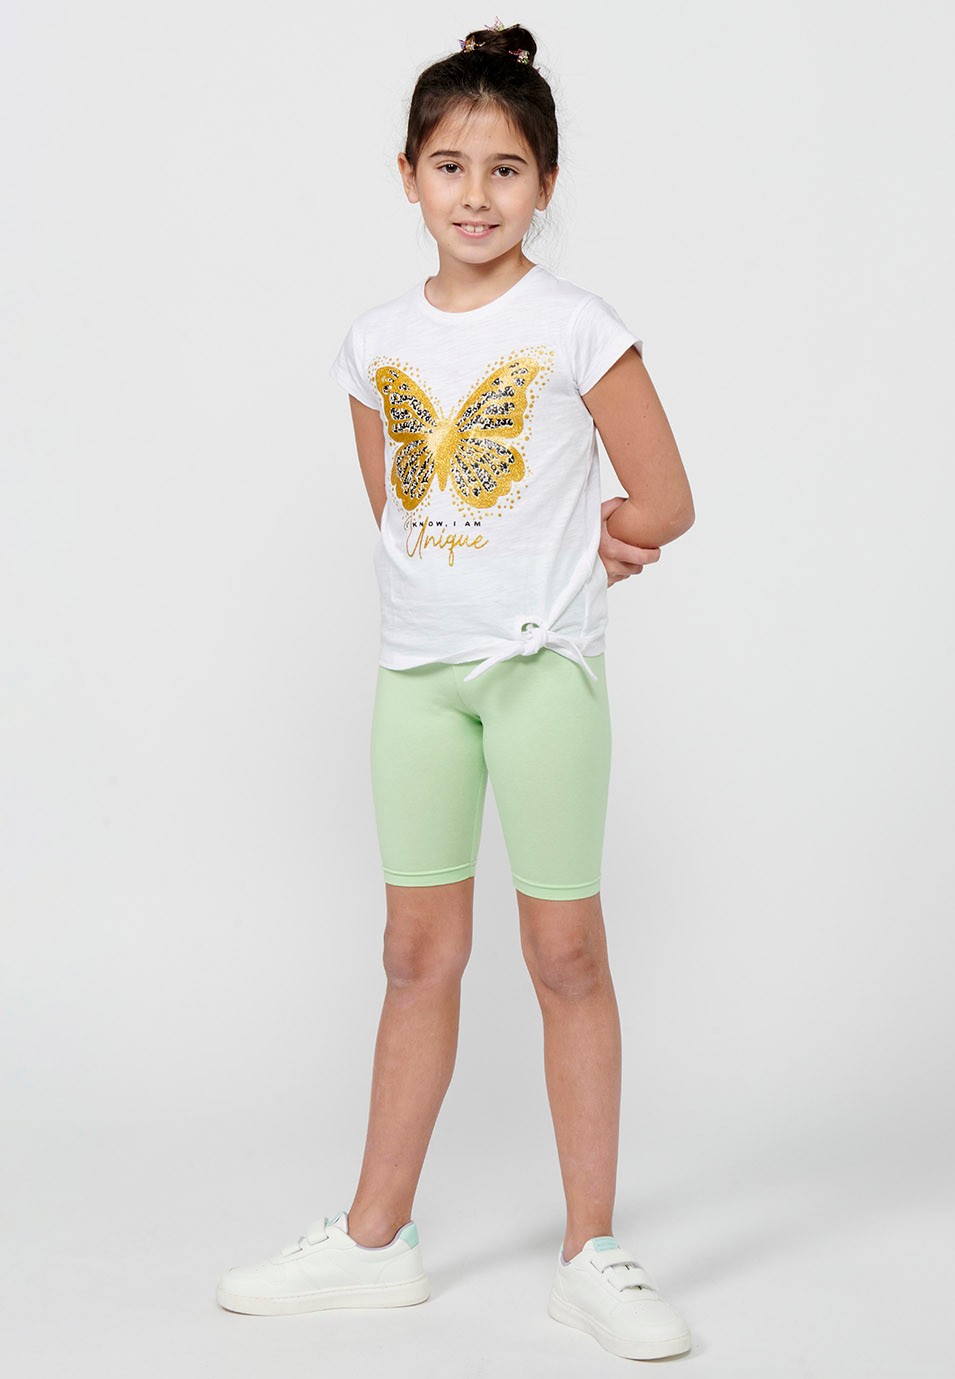 Short-sleeved T-shirt Round Neck Cotton Top with Front Print and White Front Detail for Girls 3